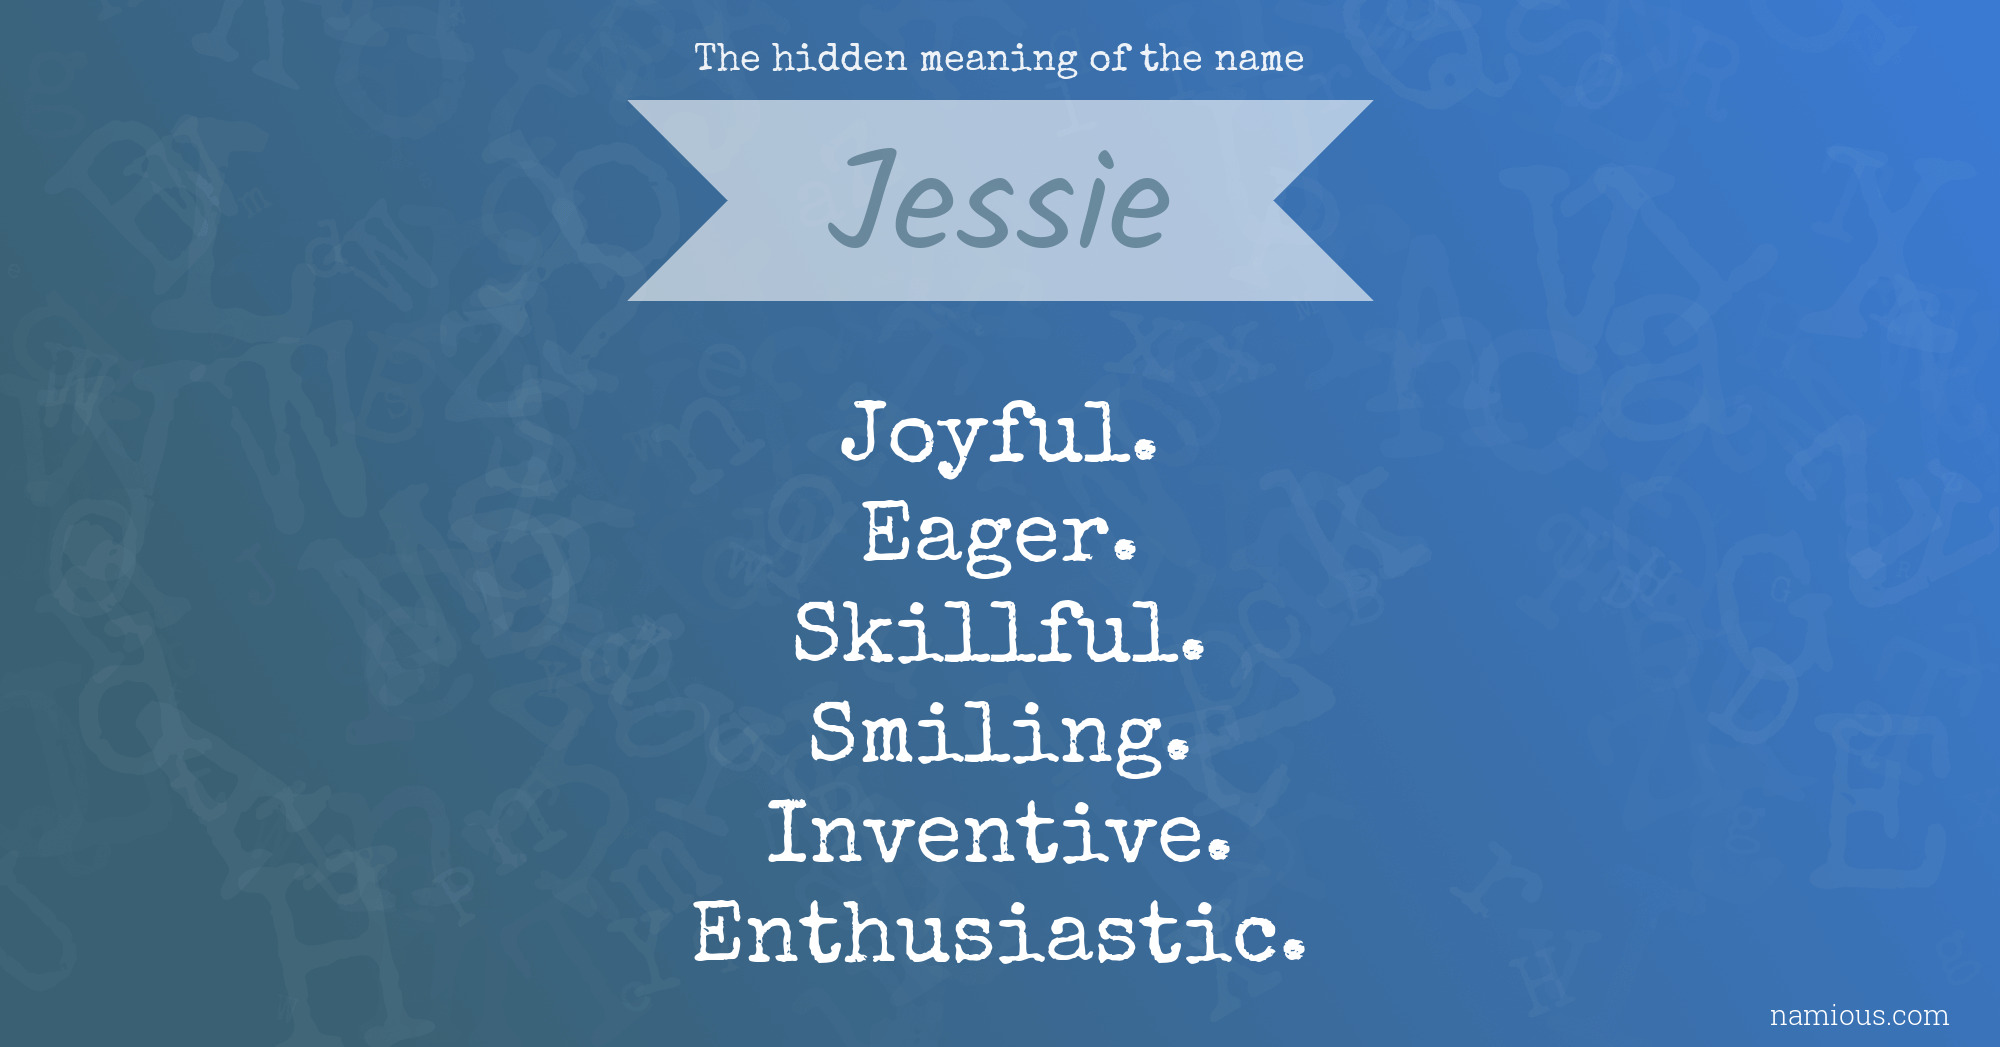 The hidden meaning of the name Jessie